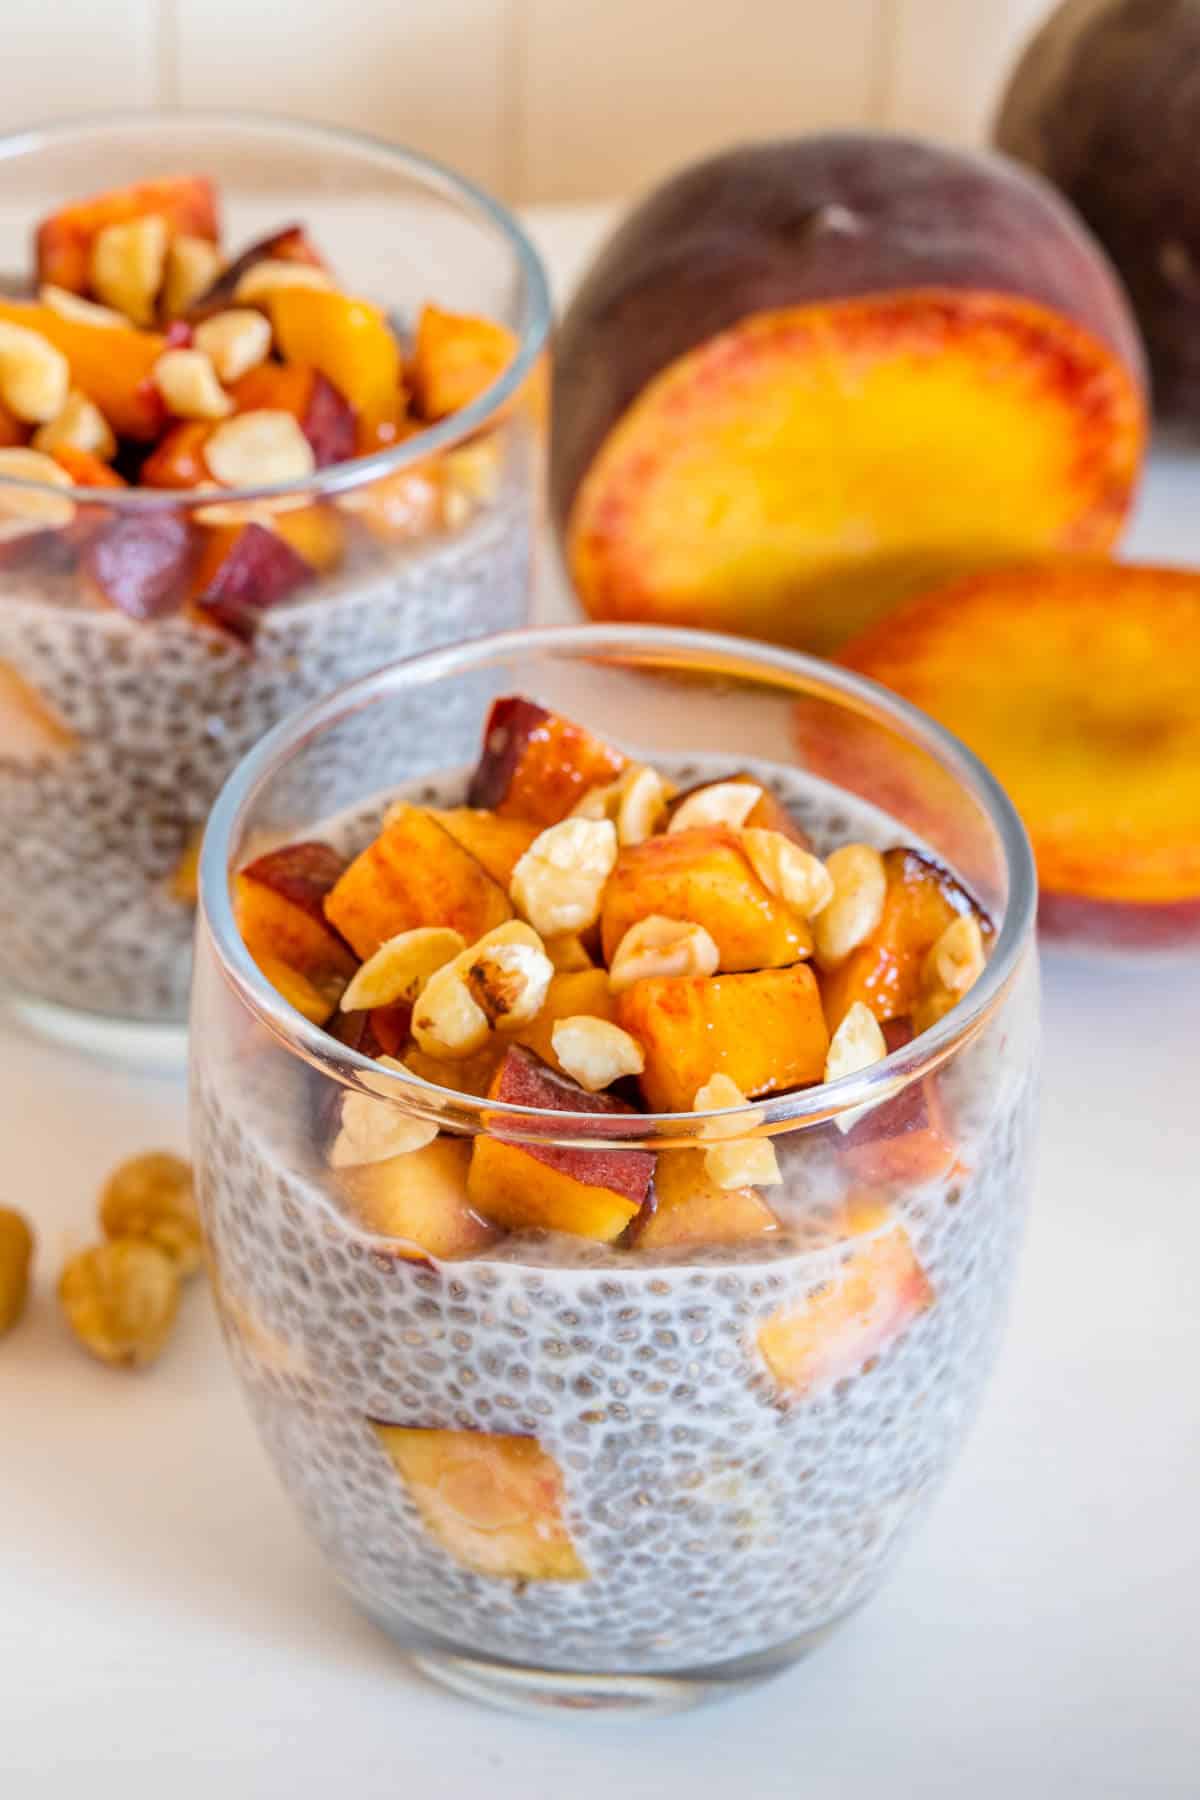 Peach chia pudding with fresh peaches and hazelnuts